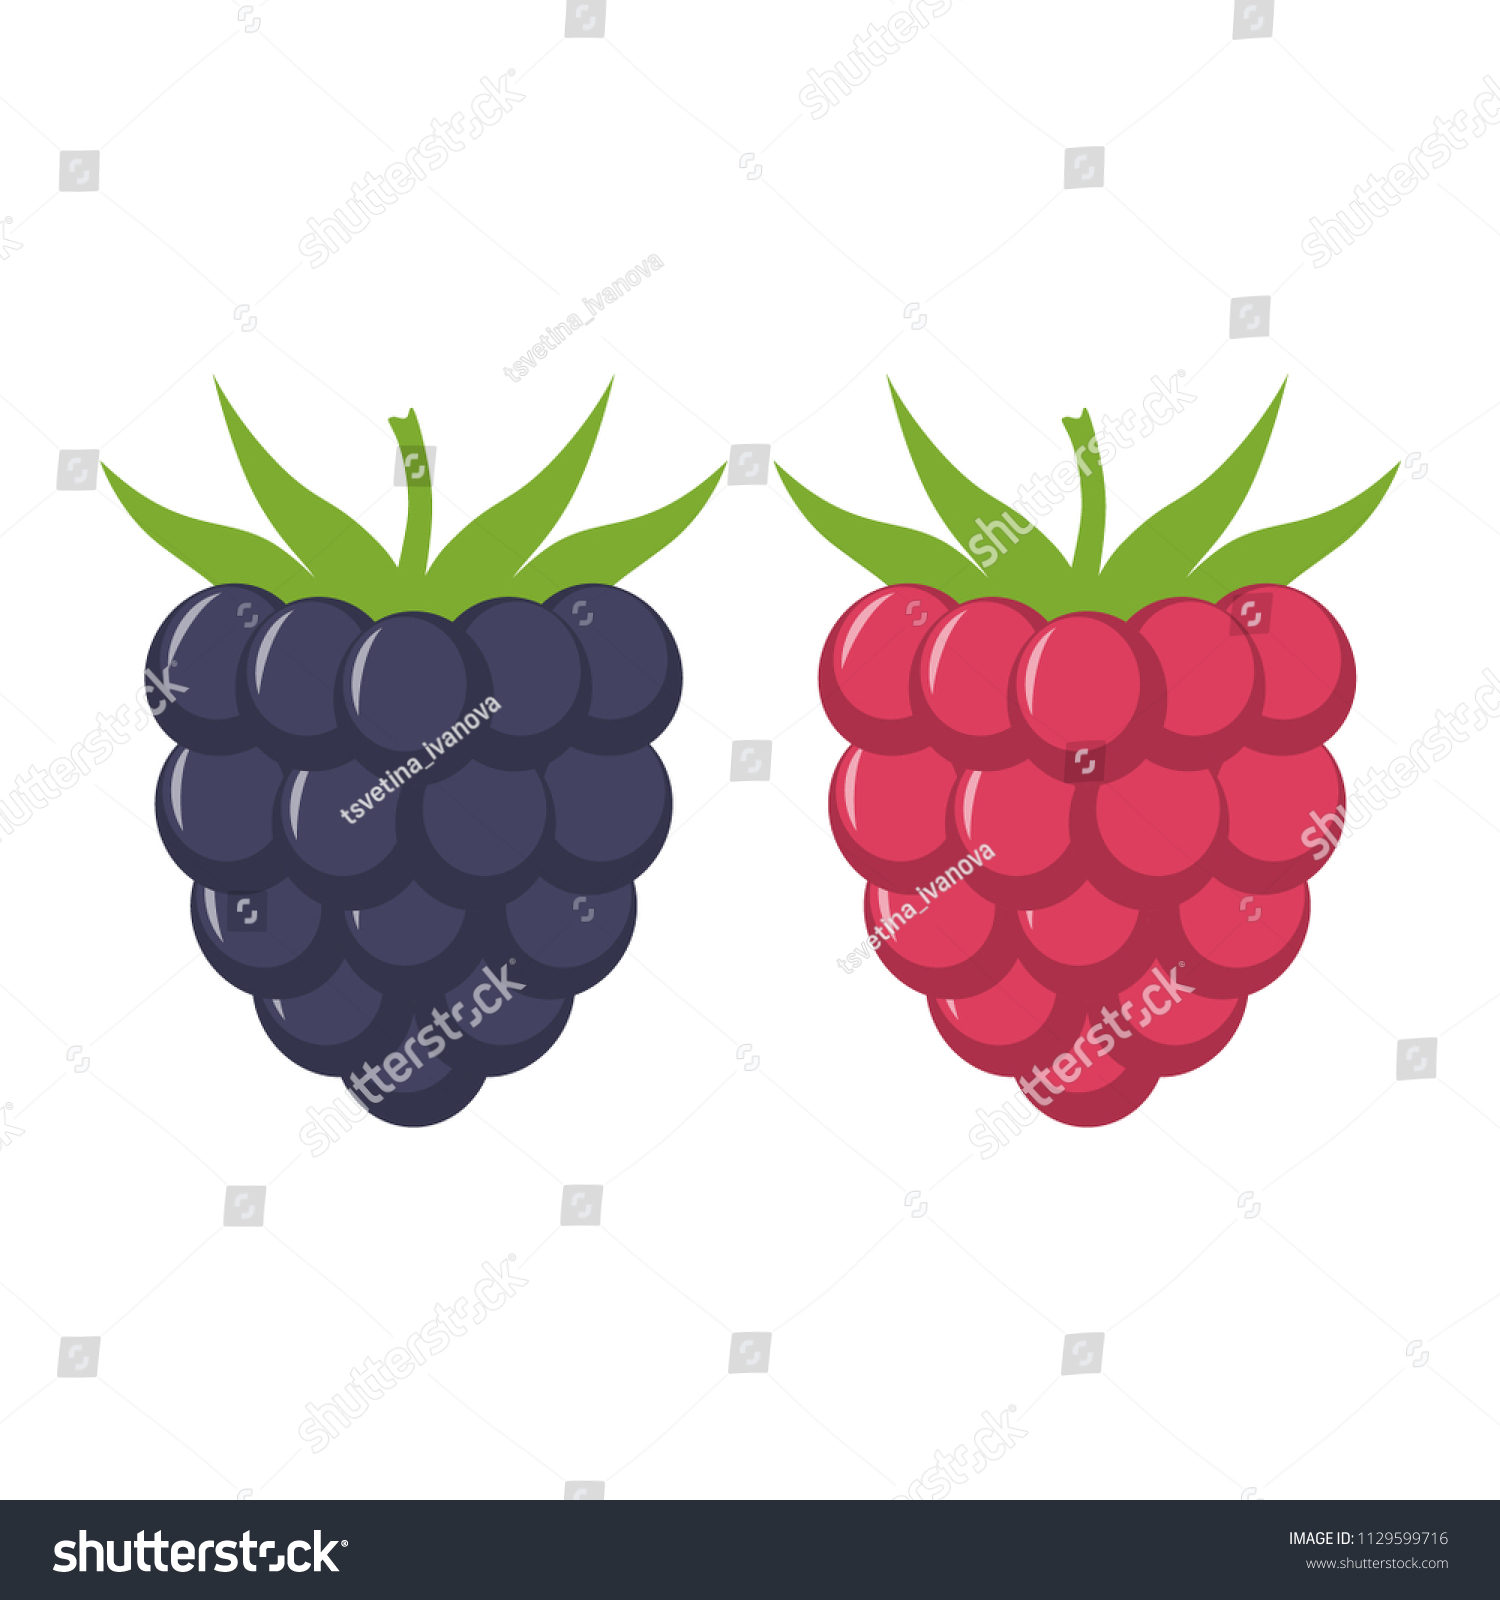 Blackberry and raspberry with leaves vector icon. Blackberry and raspberry  icon clipart. Blackberry and